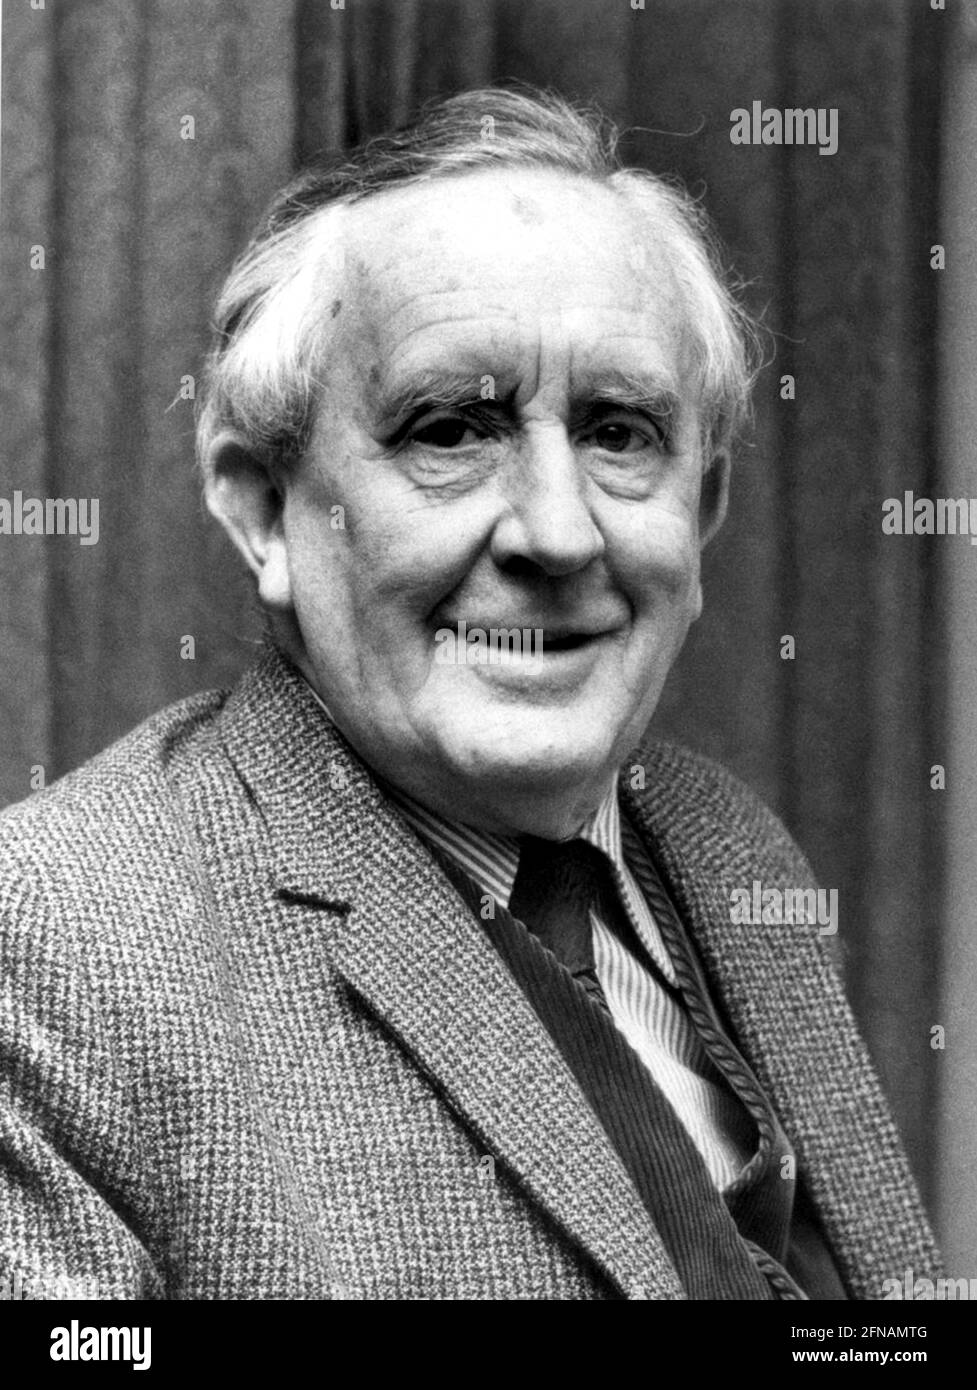 J r r tolkien portrait hi-res stock photography and images - Alamy